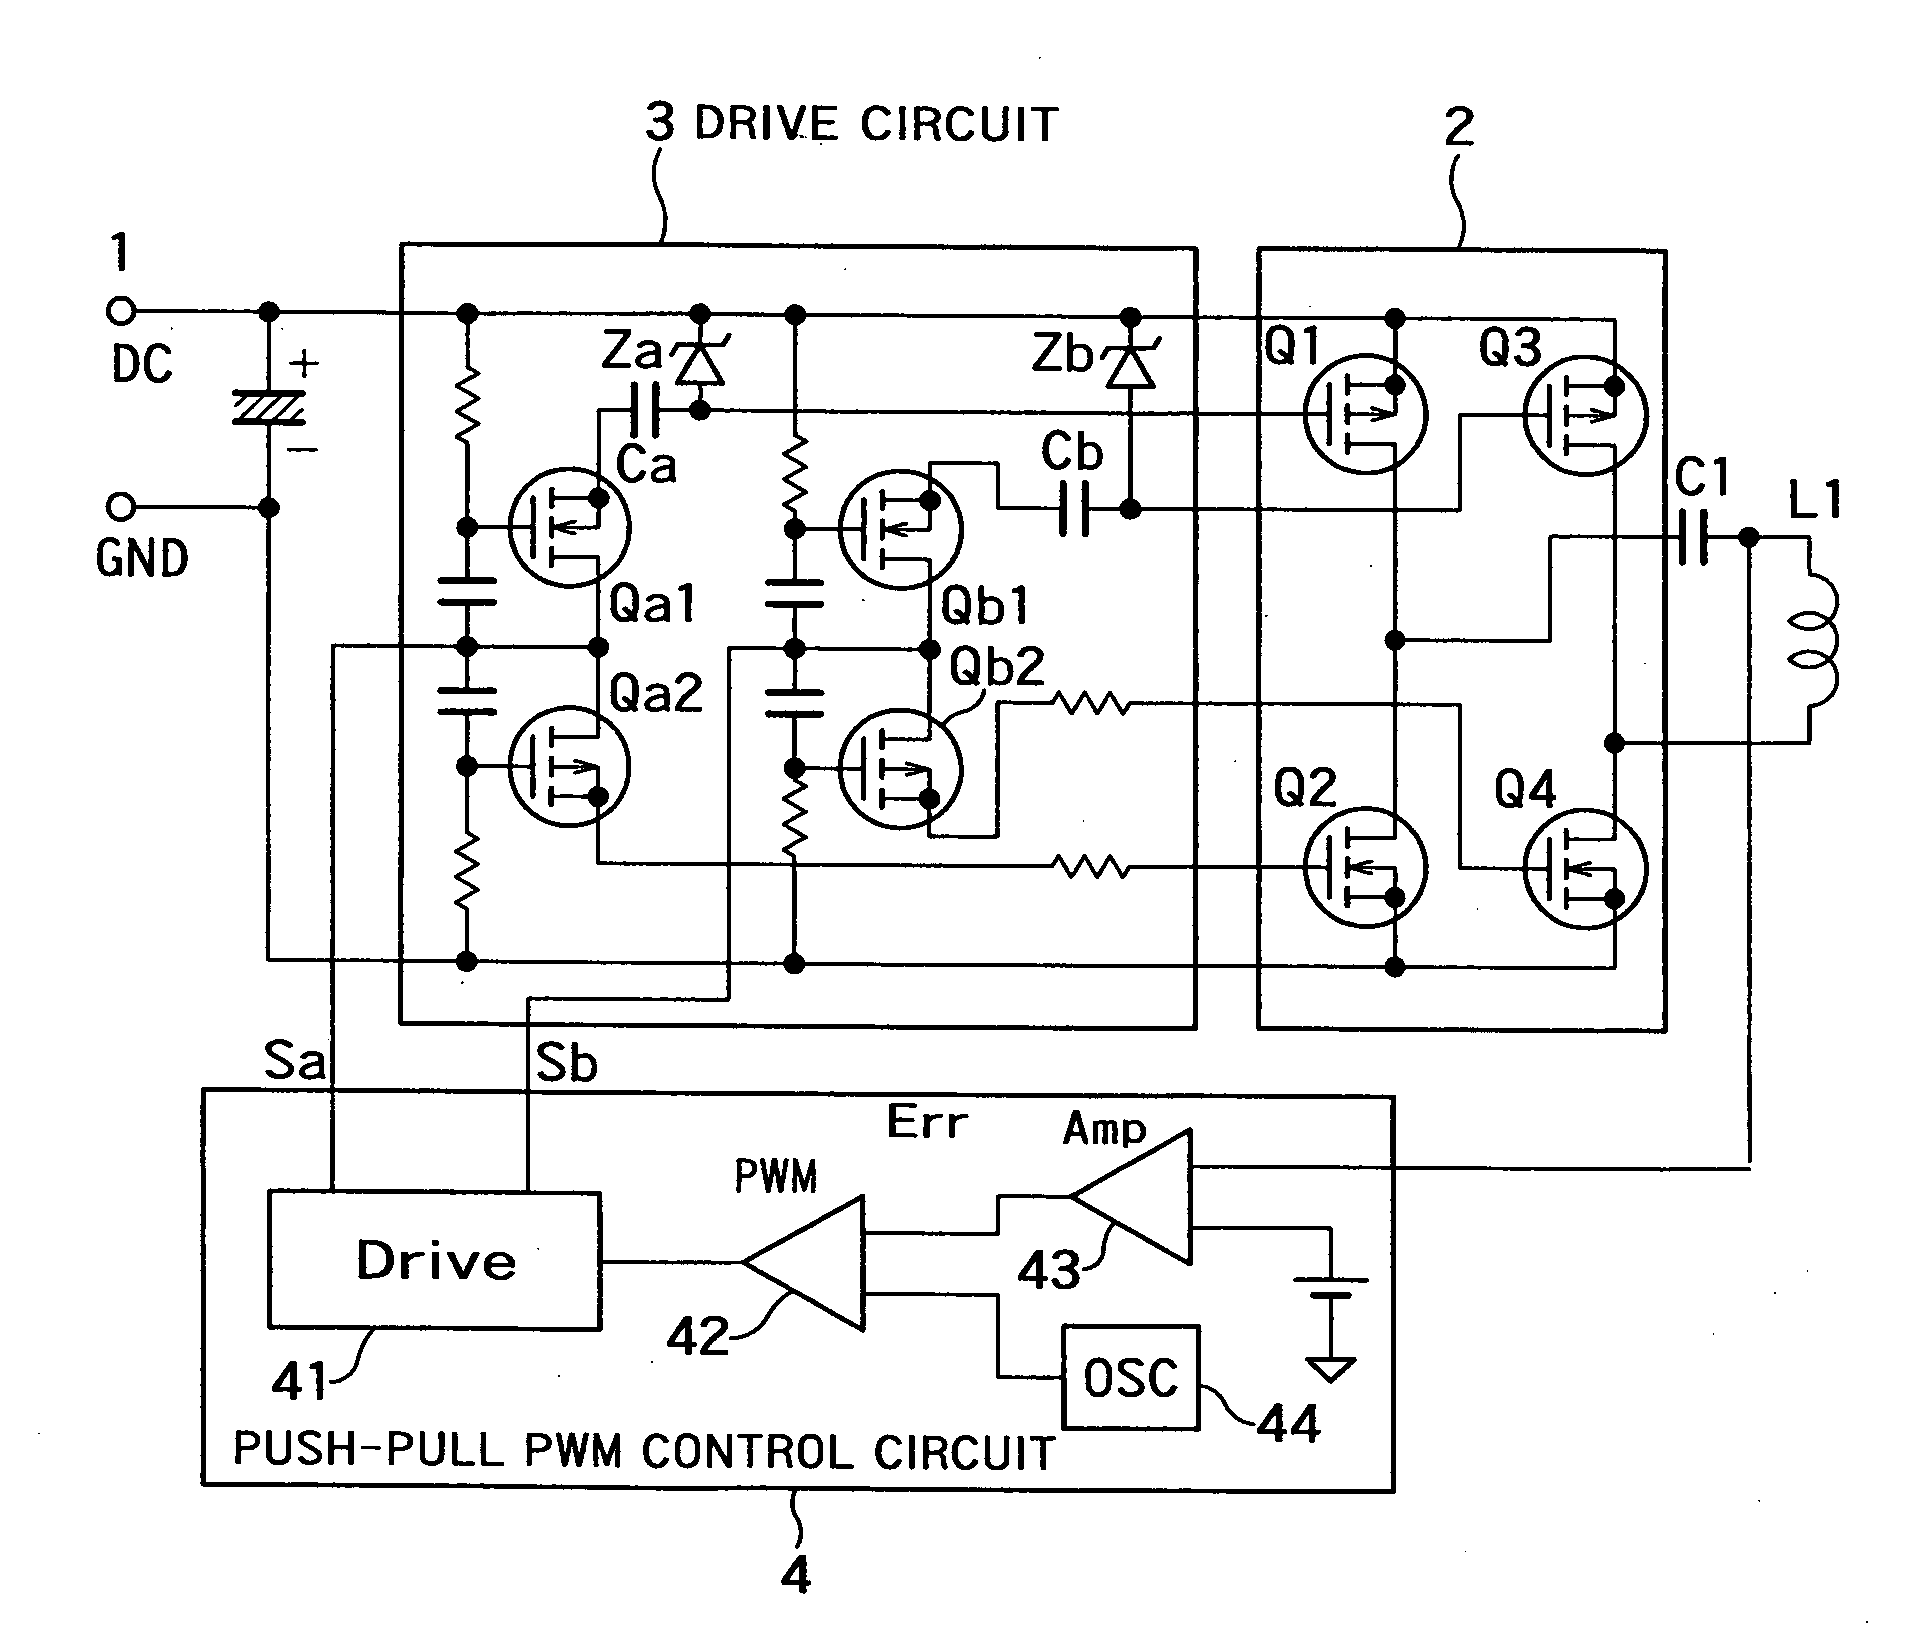 Non-contact electric power transmission circuit